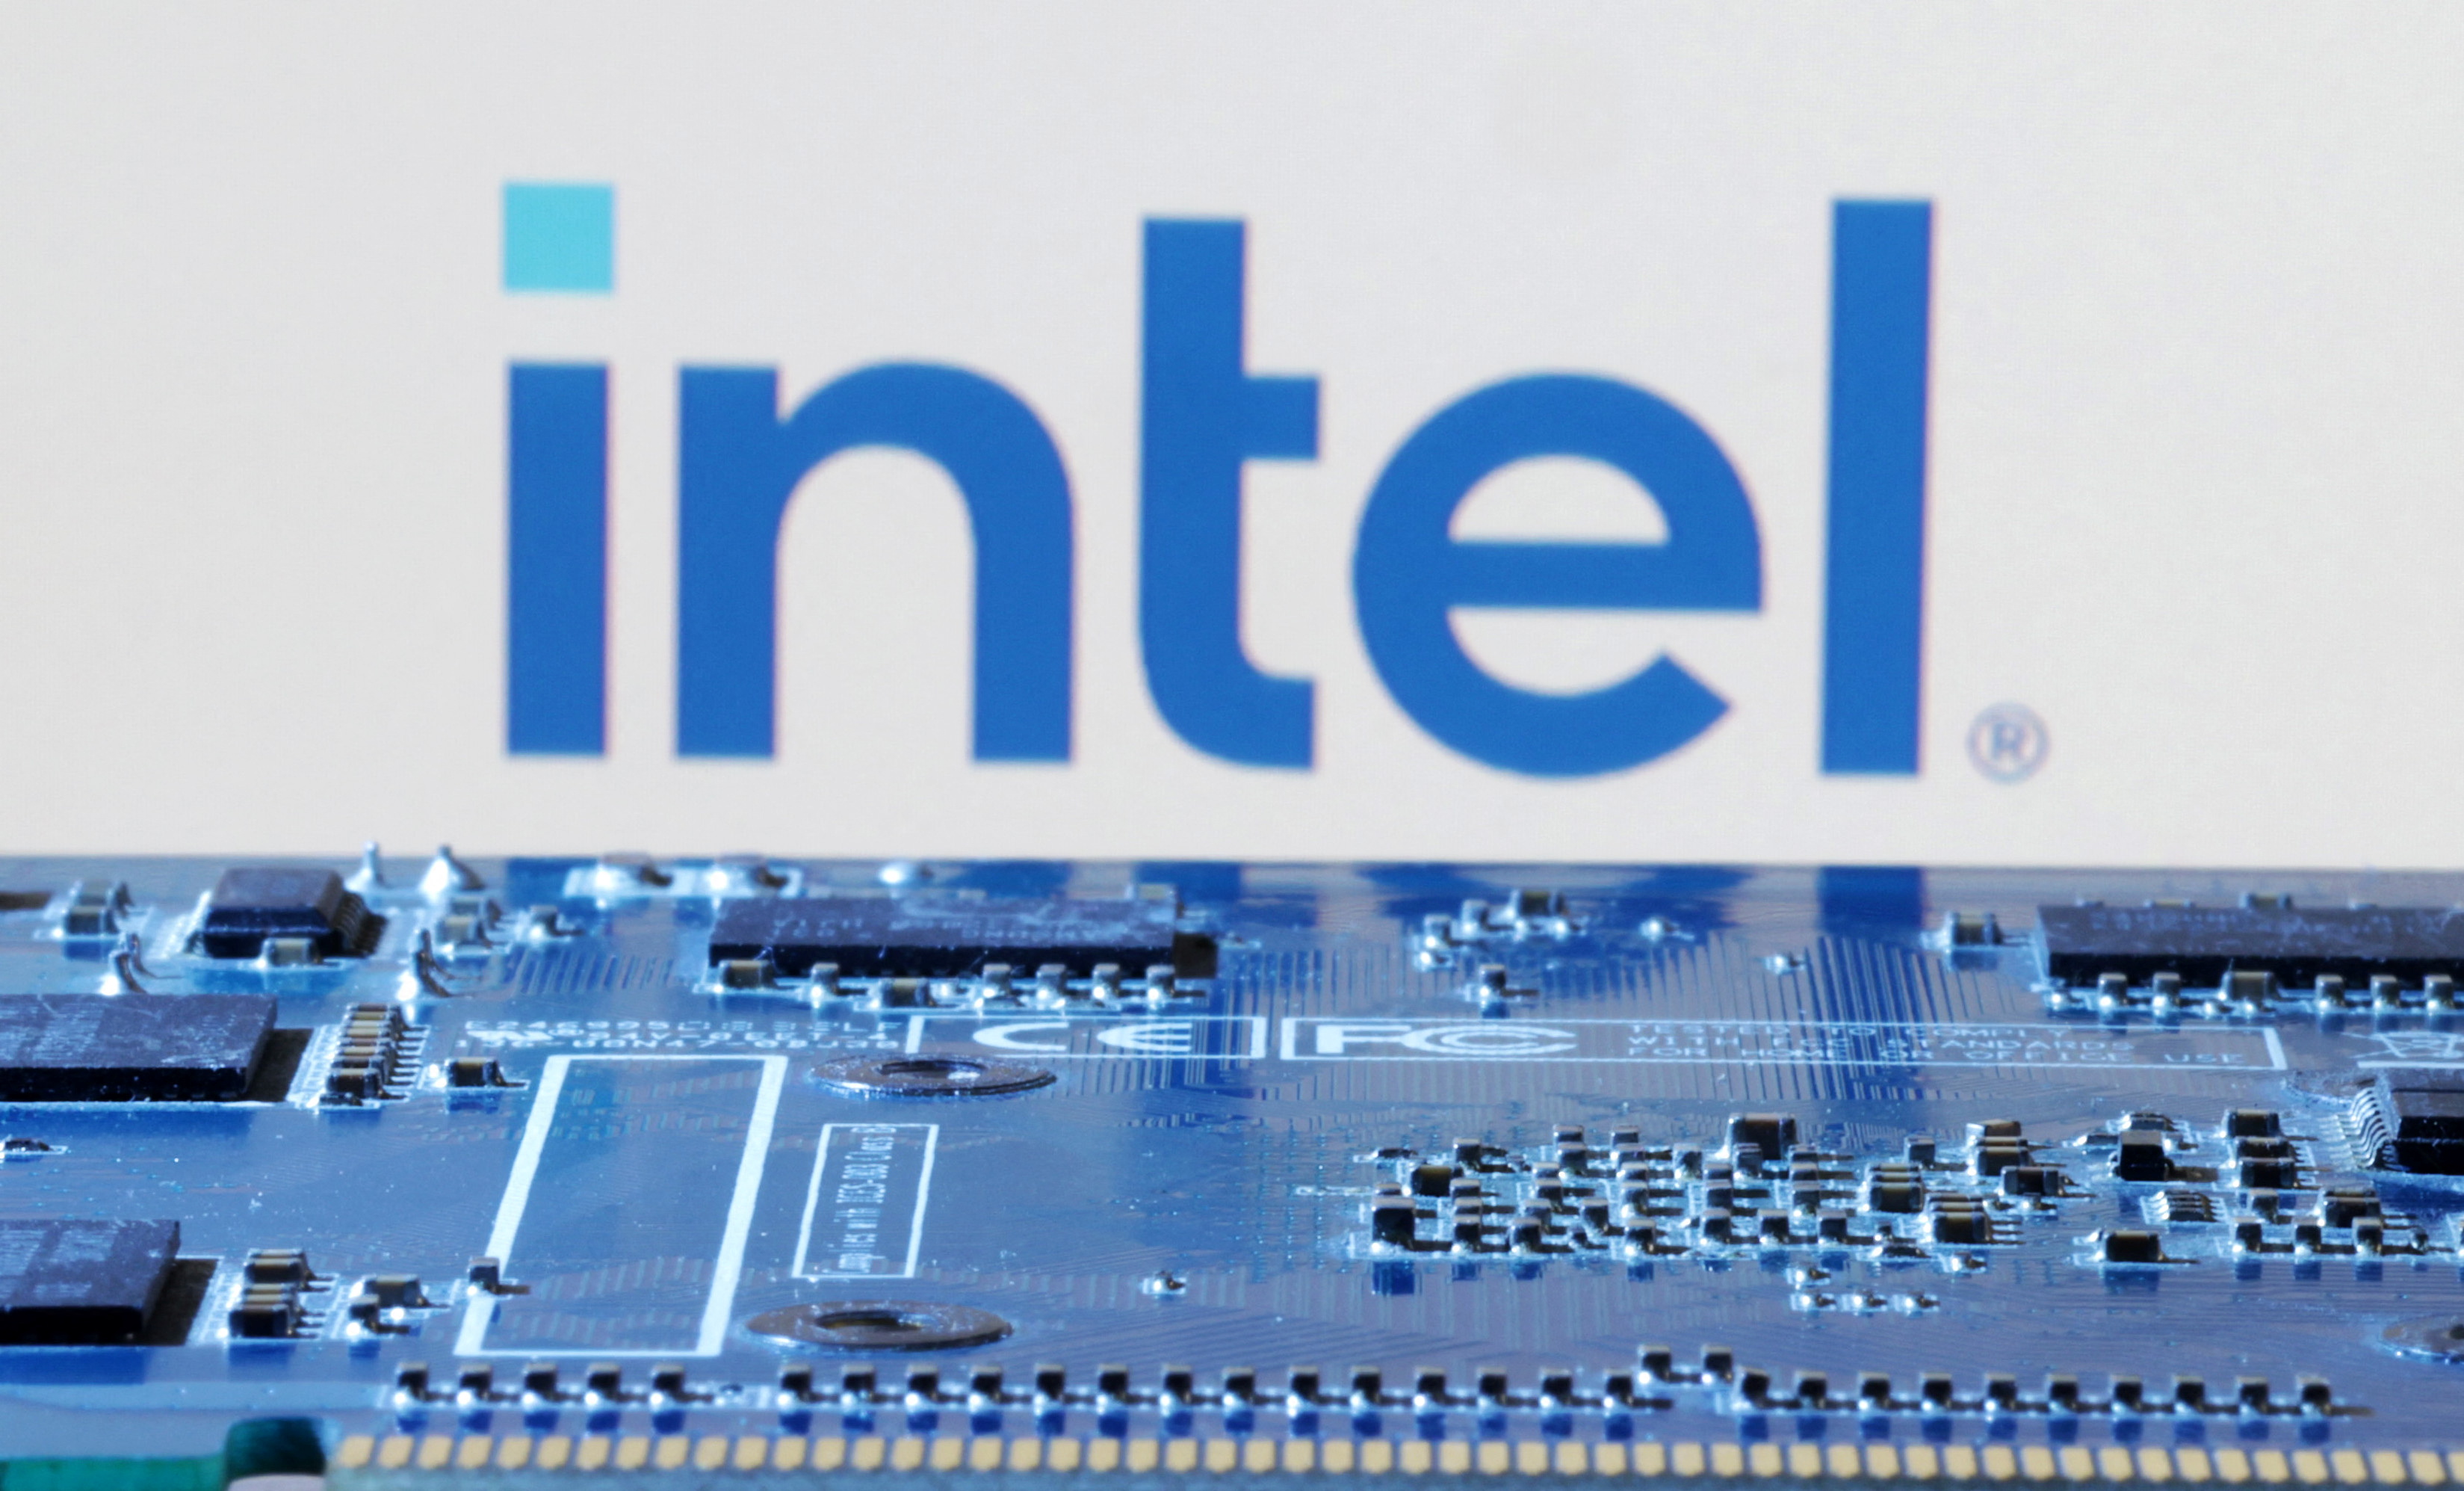 Intel reports better than expected Q1 earnings but falls short on revenue outlook. Stock slides more than 5%.